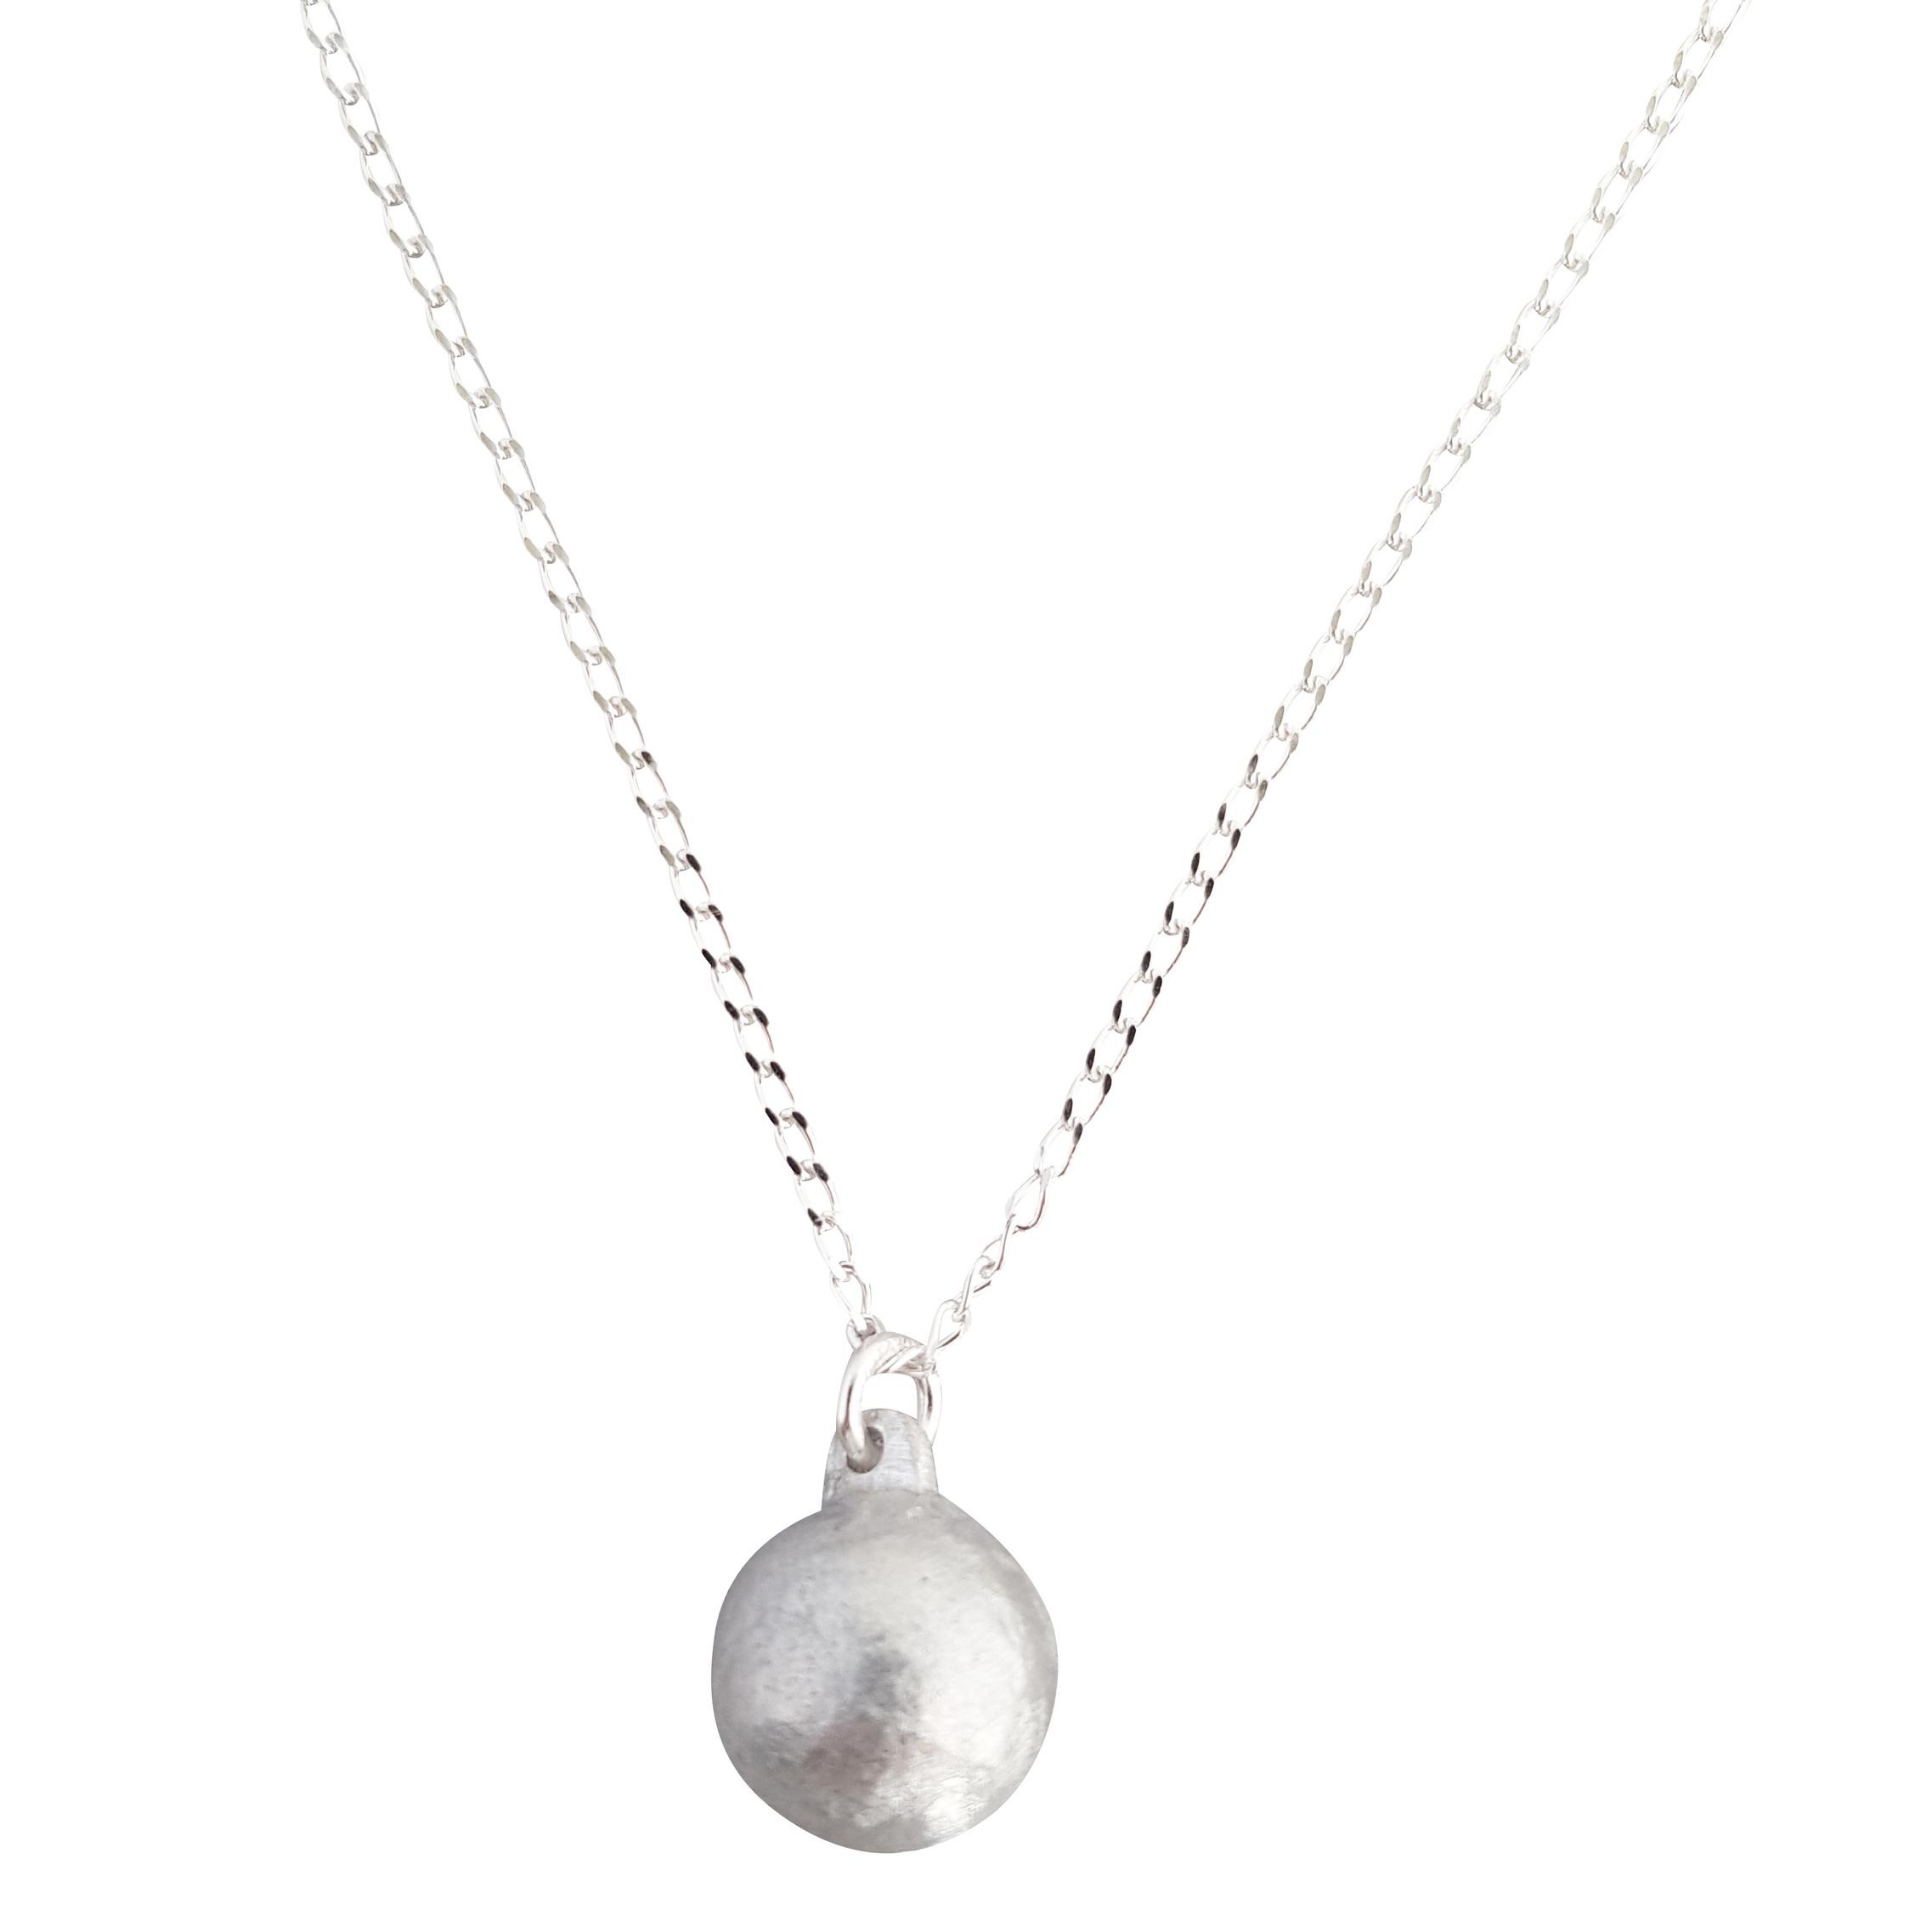 LOVEbomb Ball Shape Pendant on Sterling Silver Chain